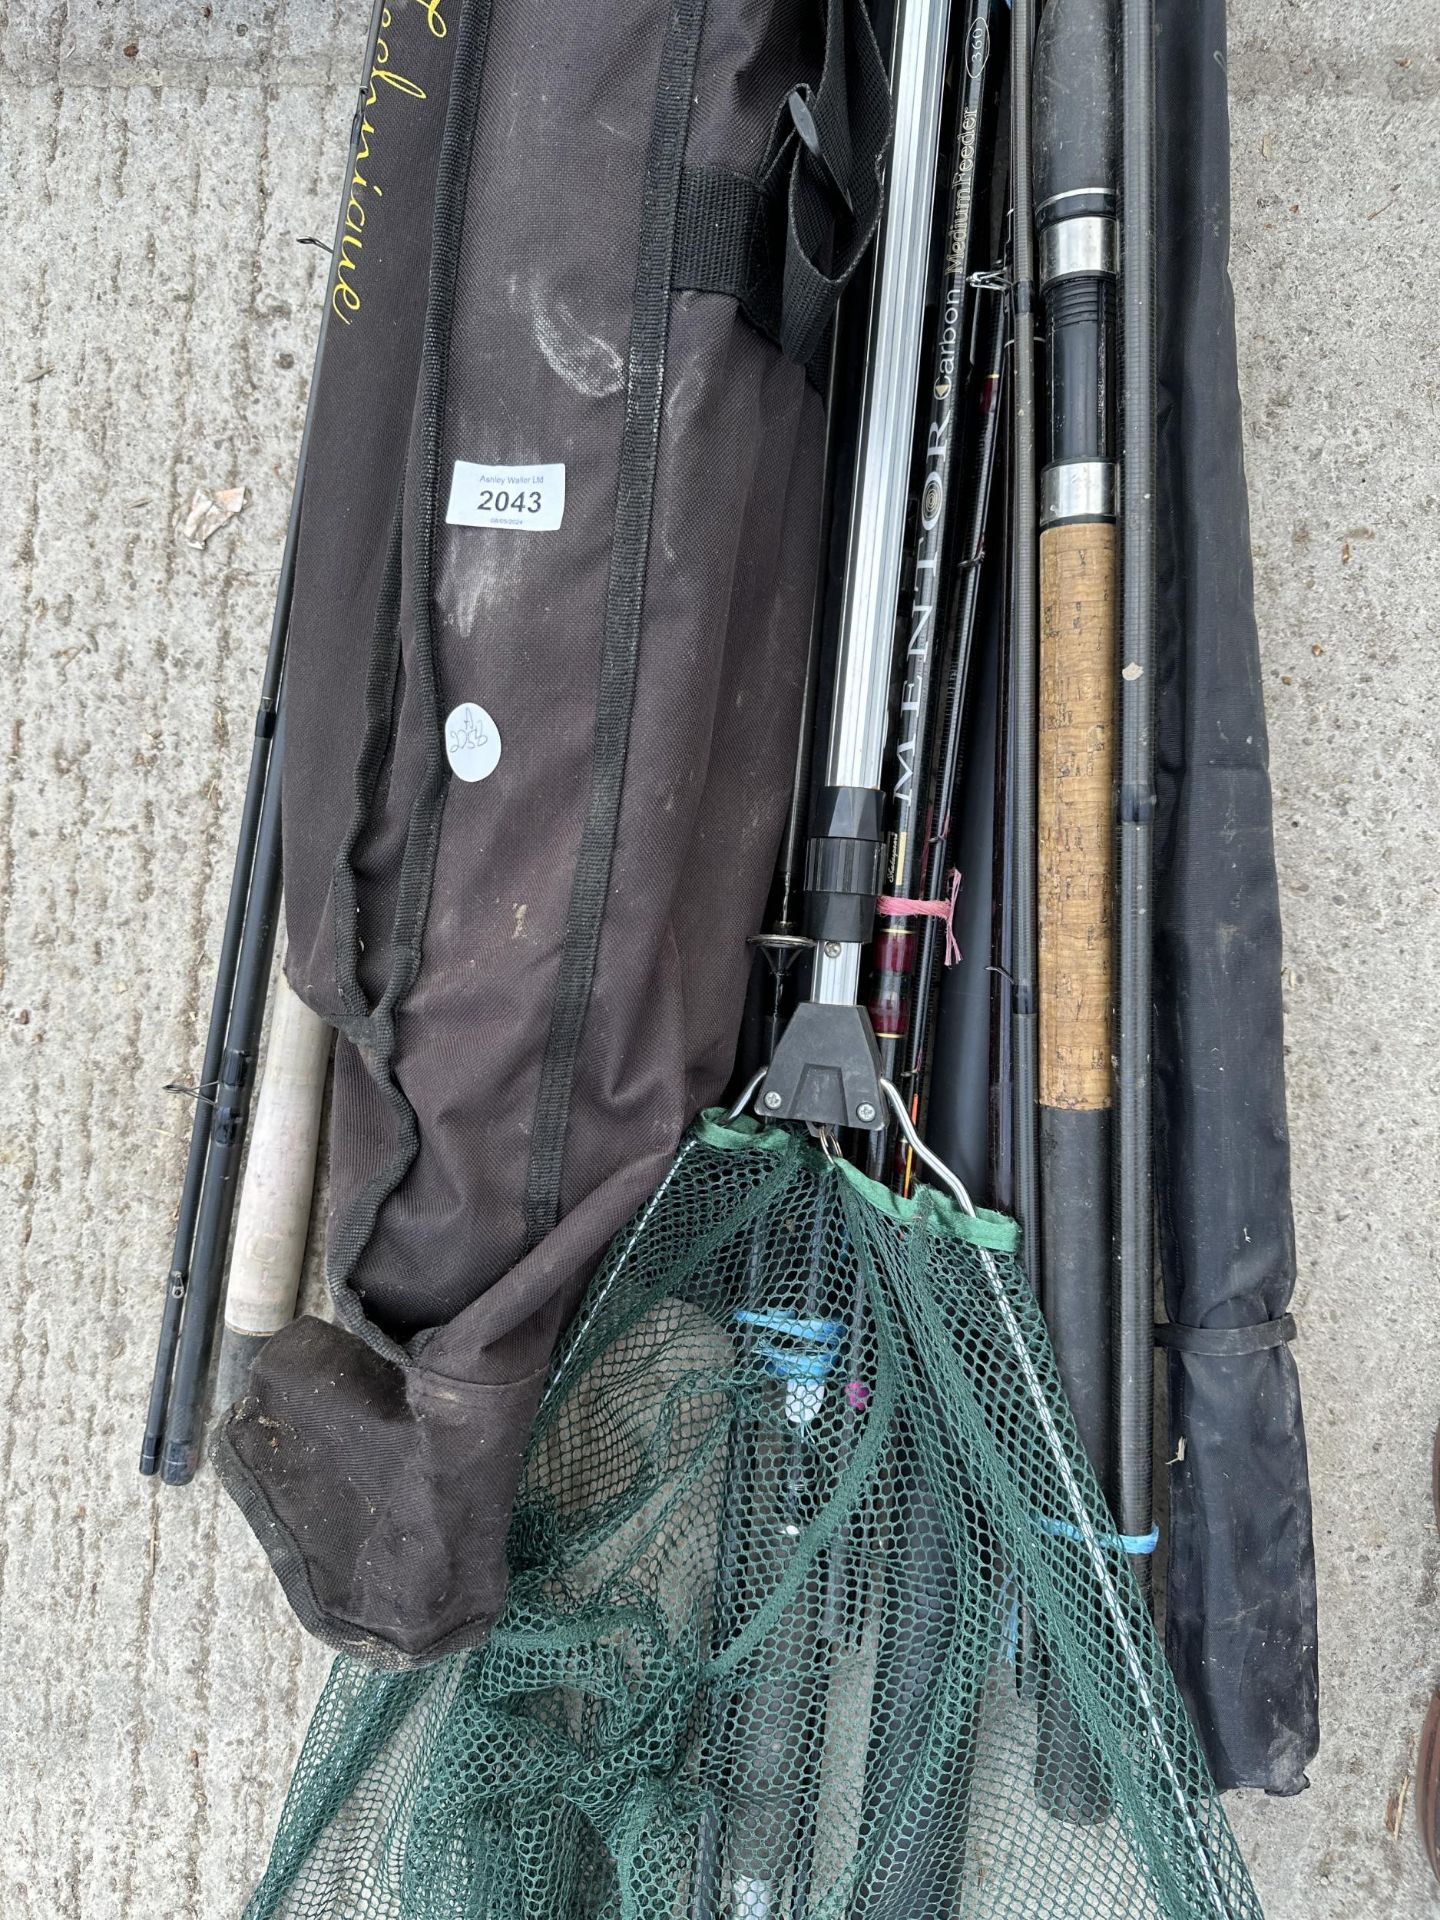 A LARGE ASSORTMENT OF FISHING RODS AND A LANDING NET - Image 2 of 5